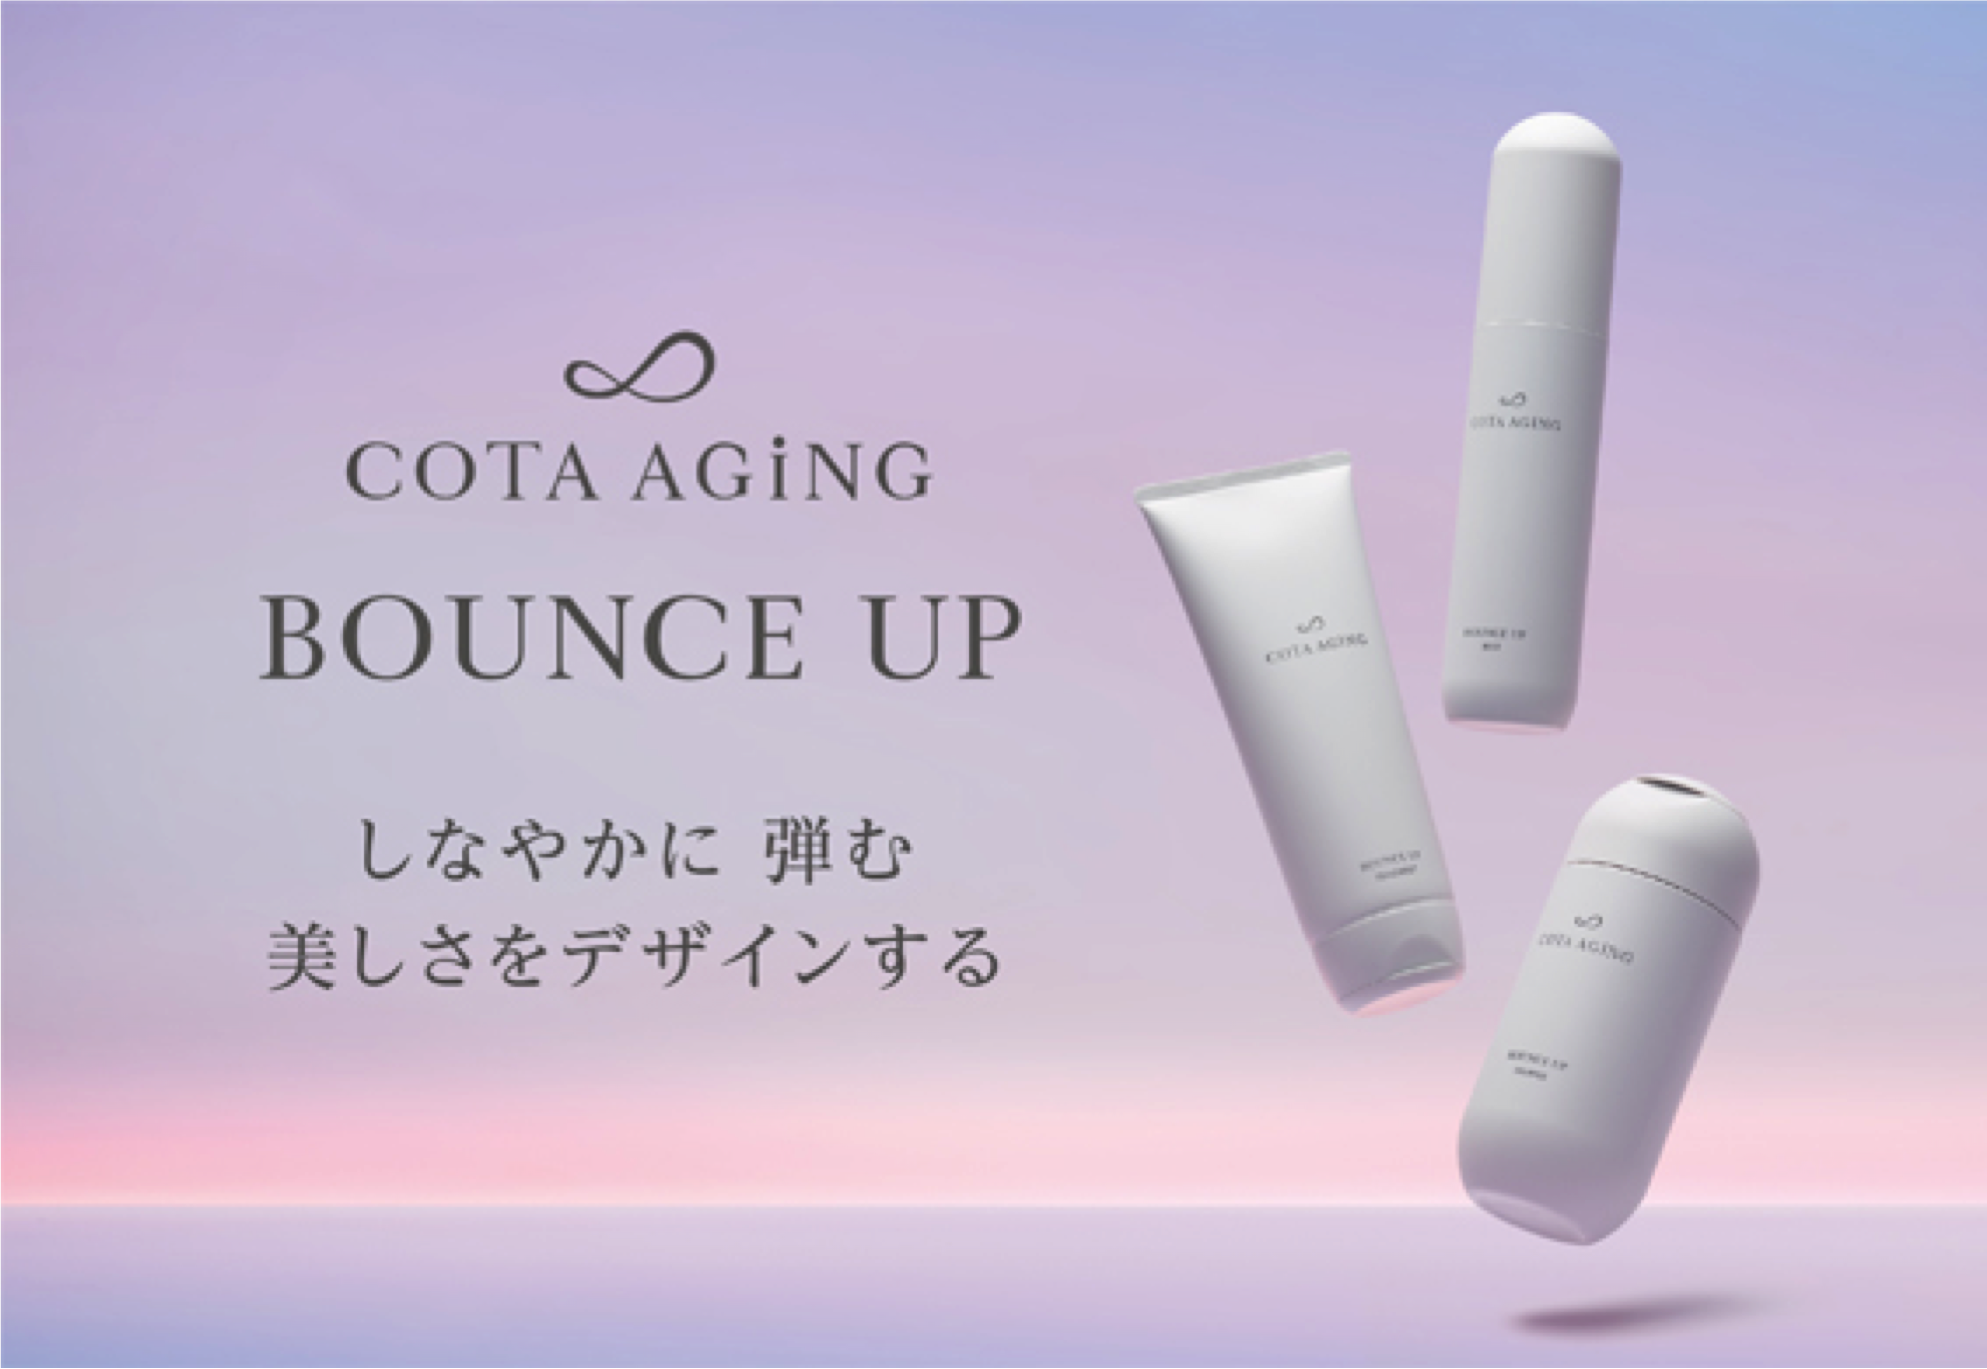 COTA AGiNG BOUNCE UP 5/10 新発売 | 株式会社ニューズ 